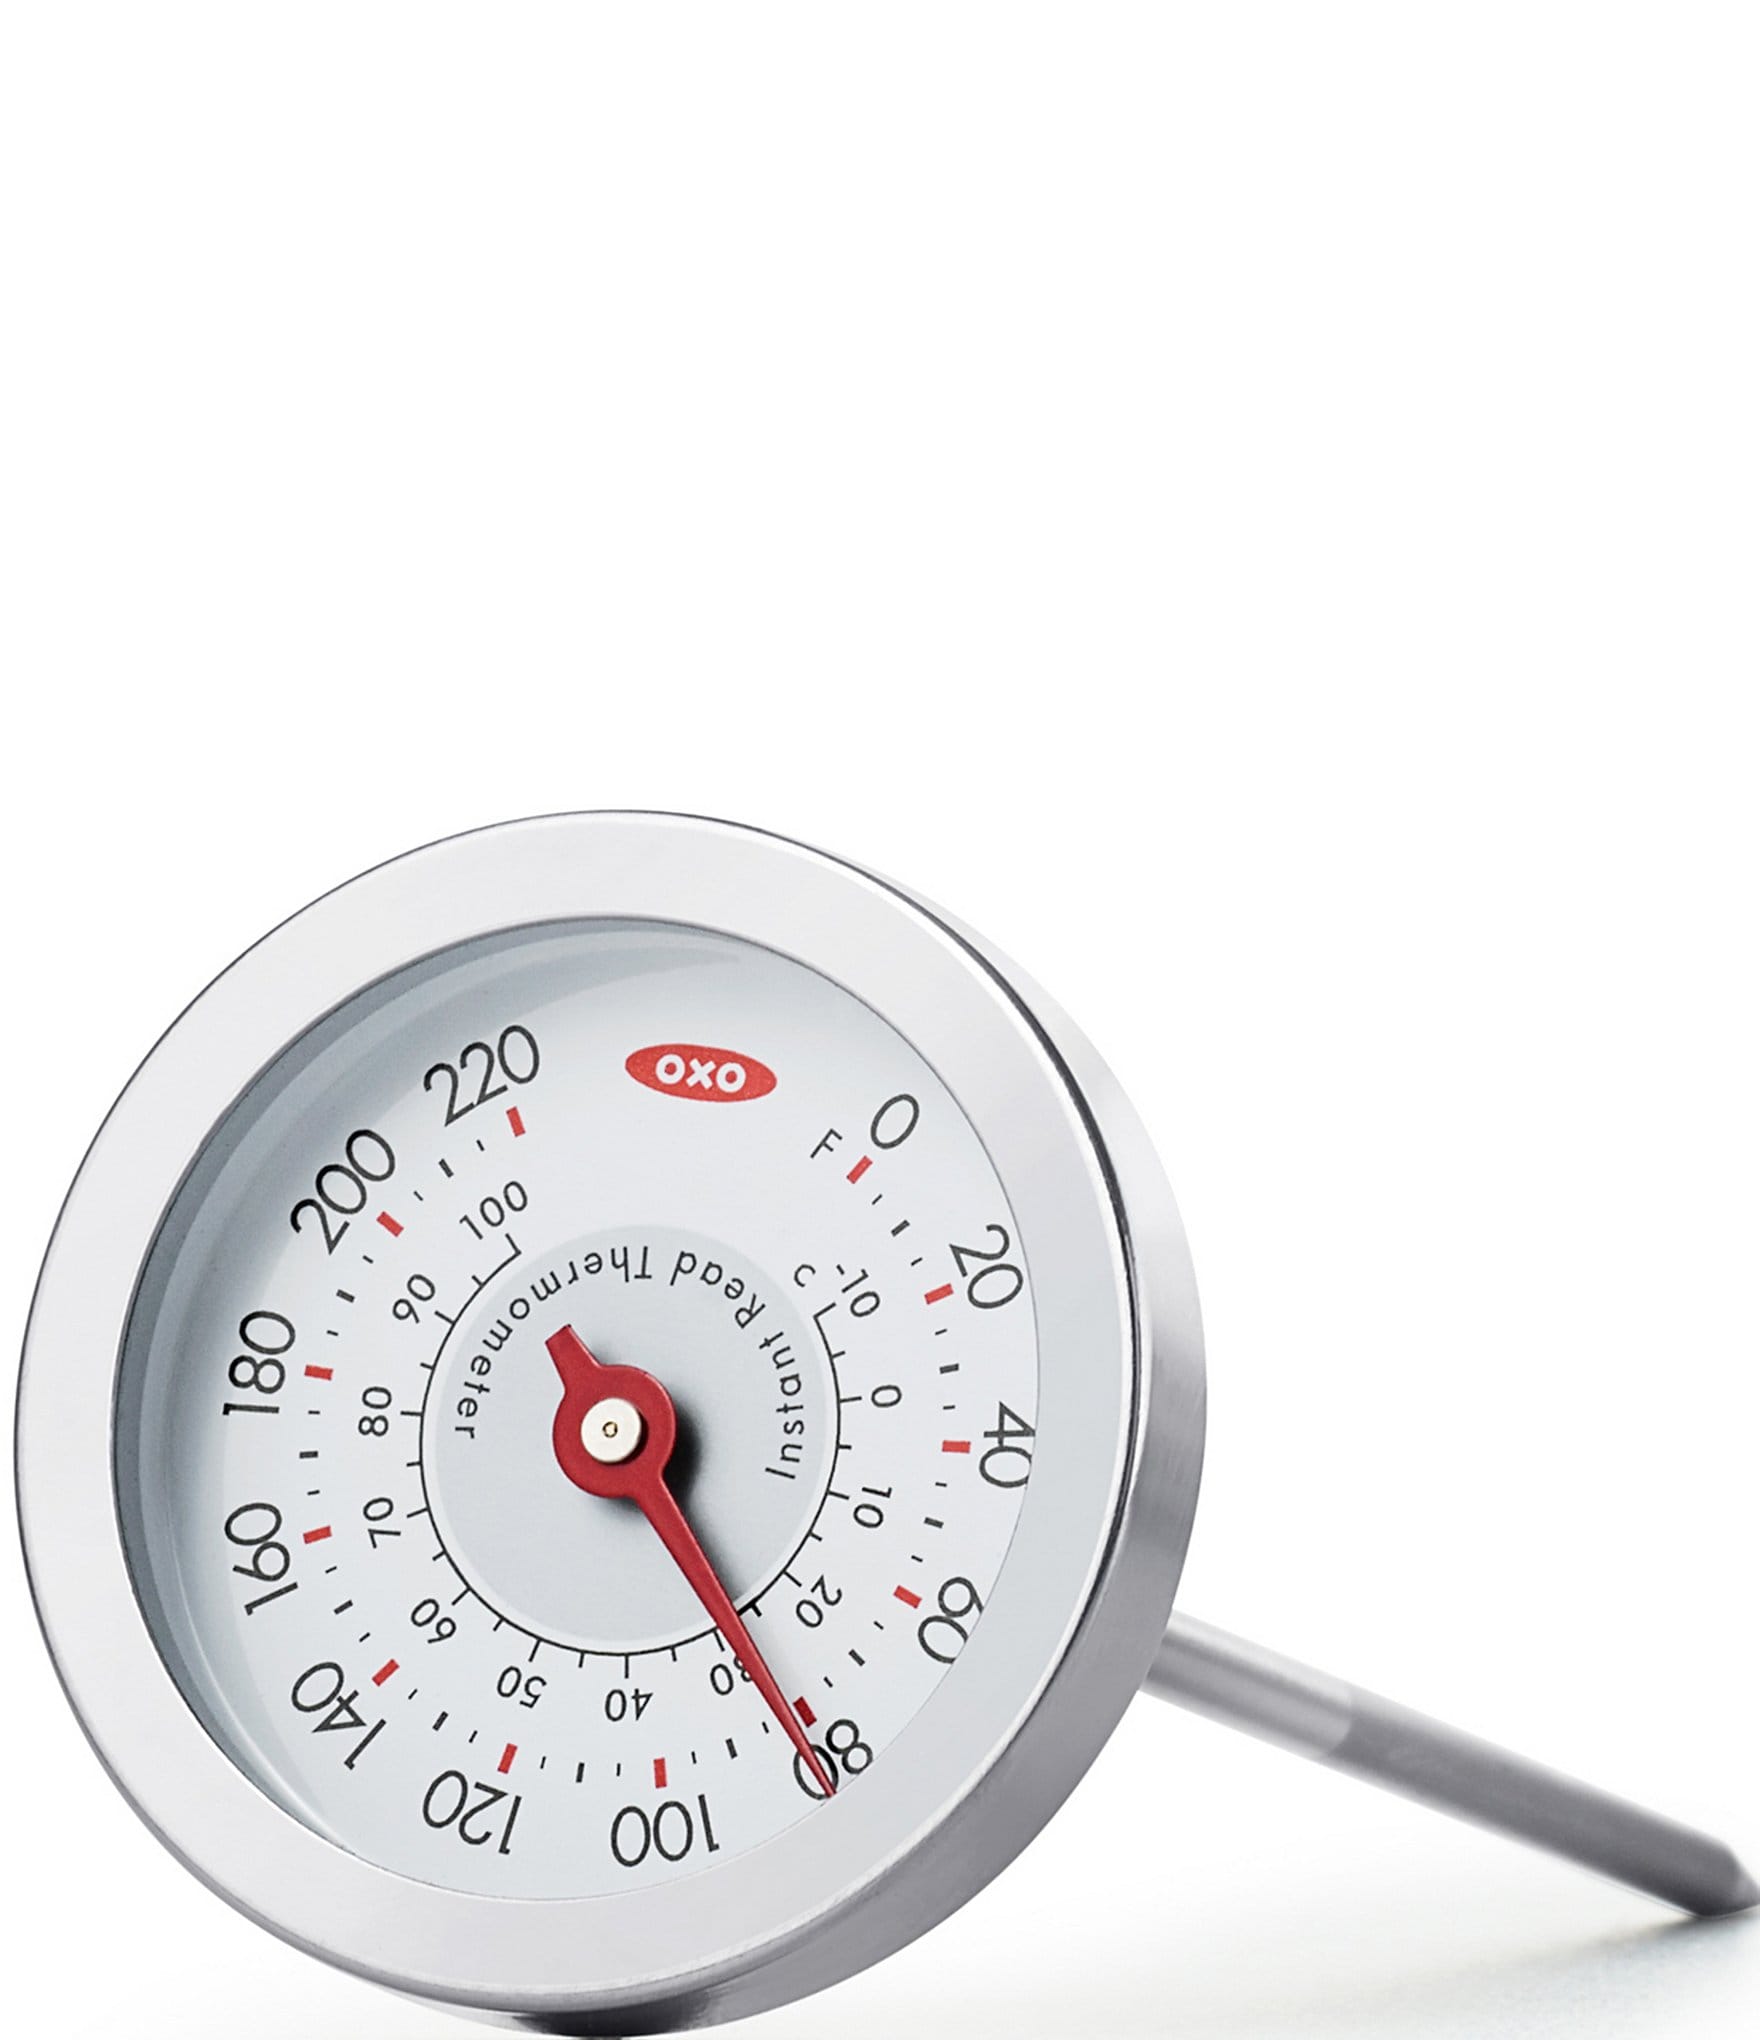 https://dimg.dillards.com/is/image/DillardsZoom/zoom/oxo-chefs-precision-instant-read-thermometer/04850188_zi.jpg